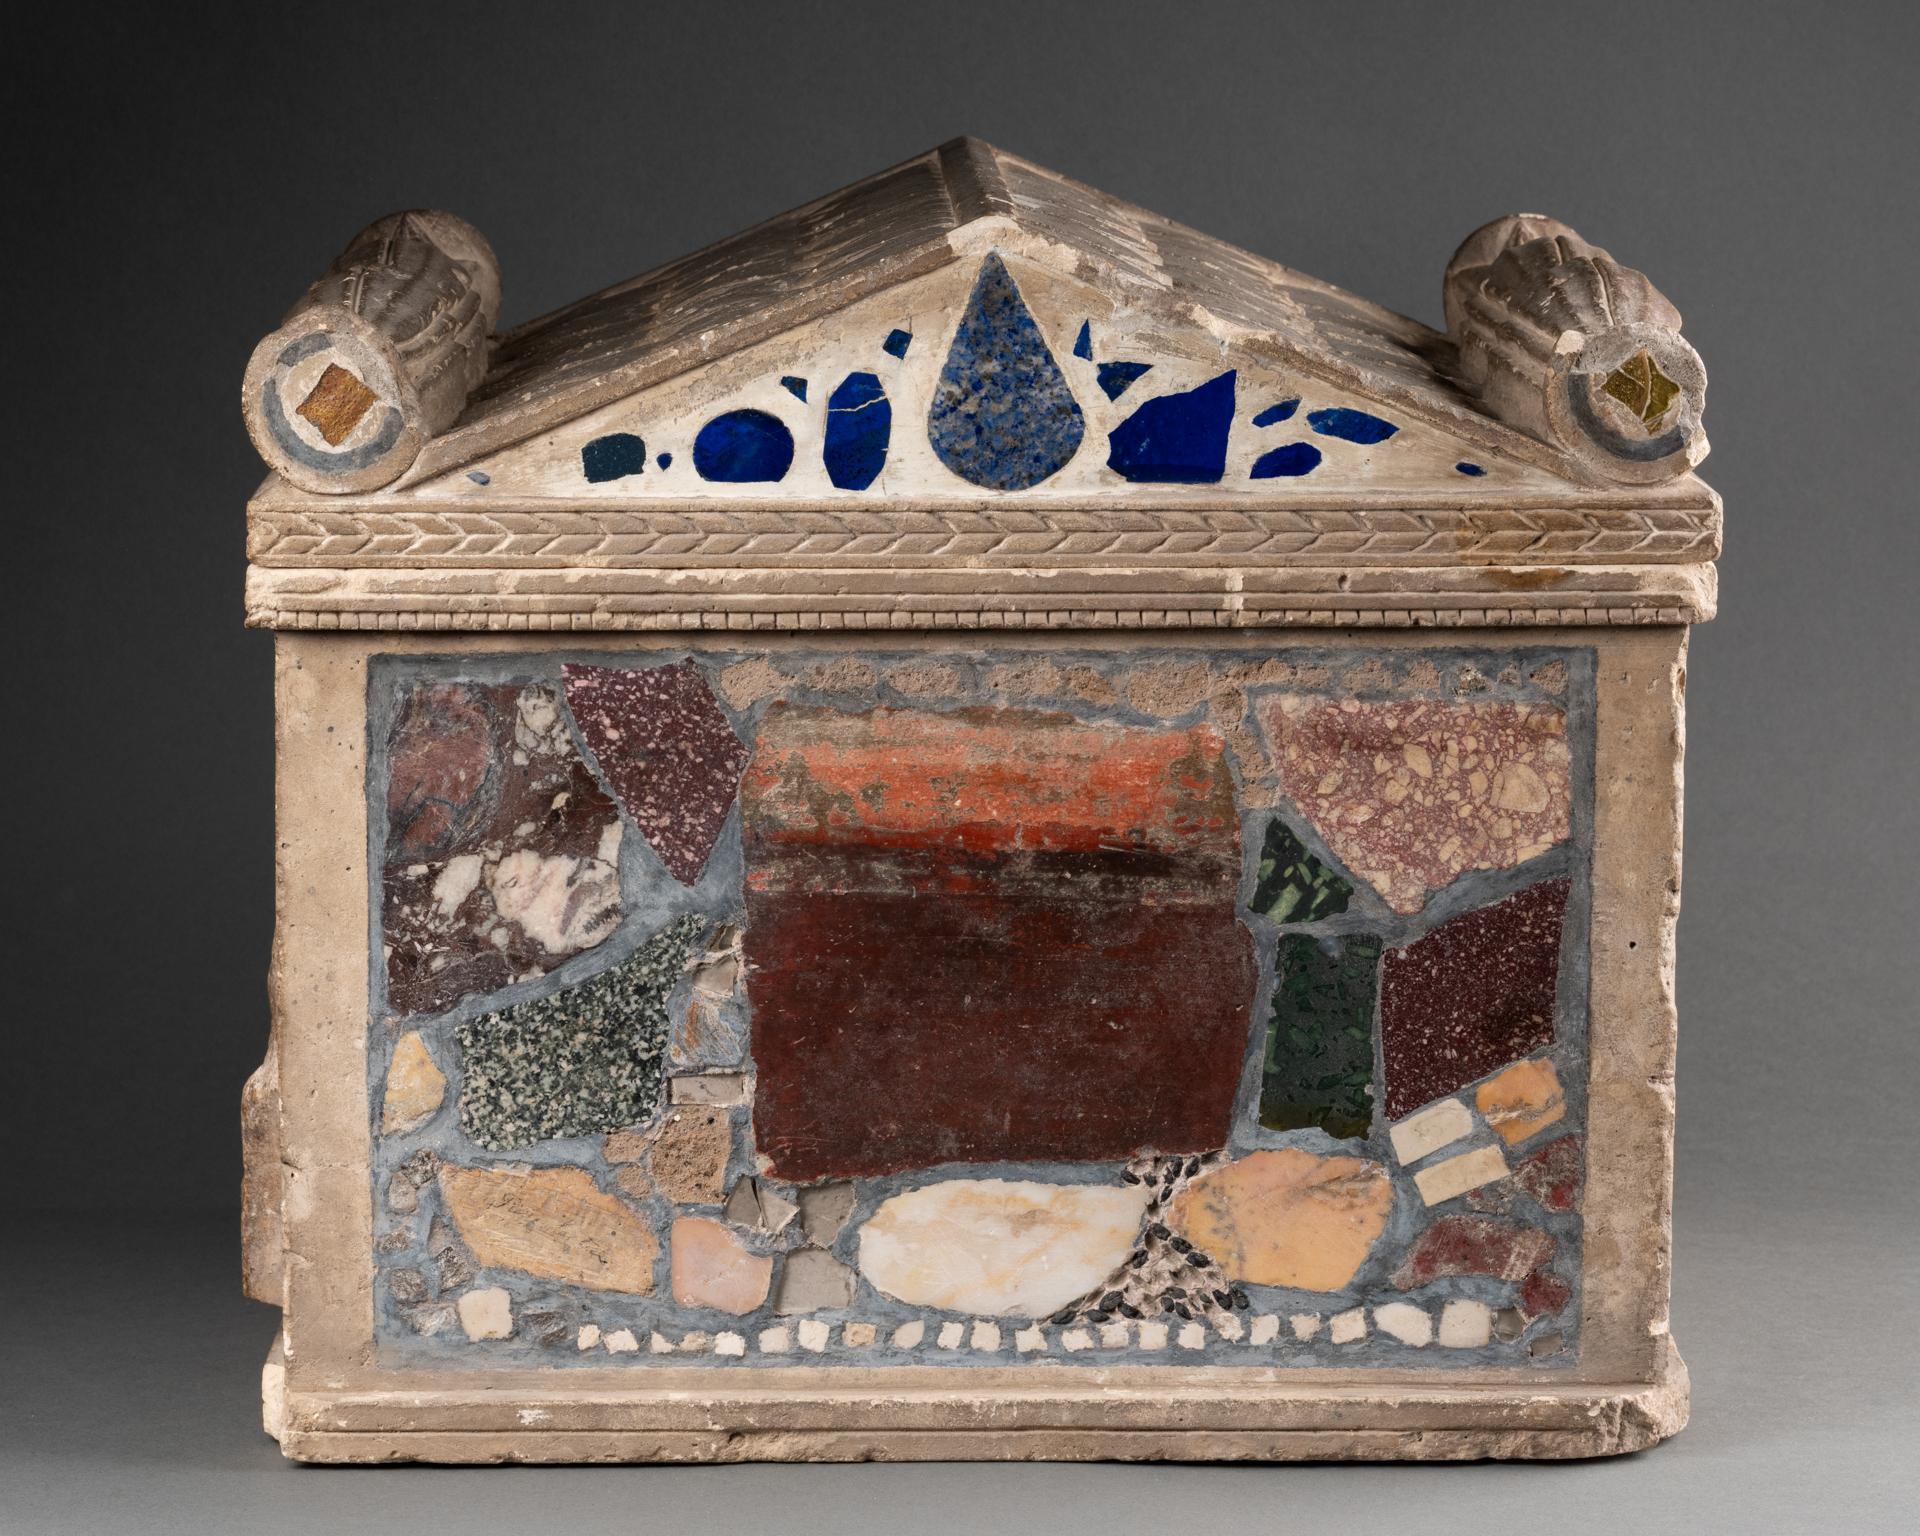 Grand Tour Cinerarium
Limestone, inlaid with ancient fragments of Franco-Italian 18th Century and Roman, 3rd Century AD

Provenance:
Private Collection UK
Private Collection France, pre-1980
Art Loss Register Ref: S00241018

H 29 x W 33,5 x D 23